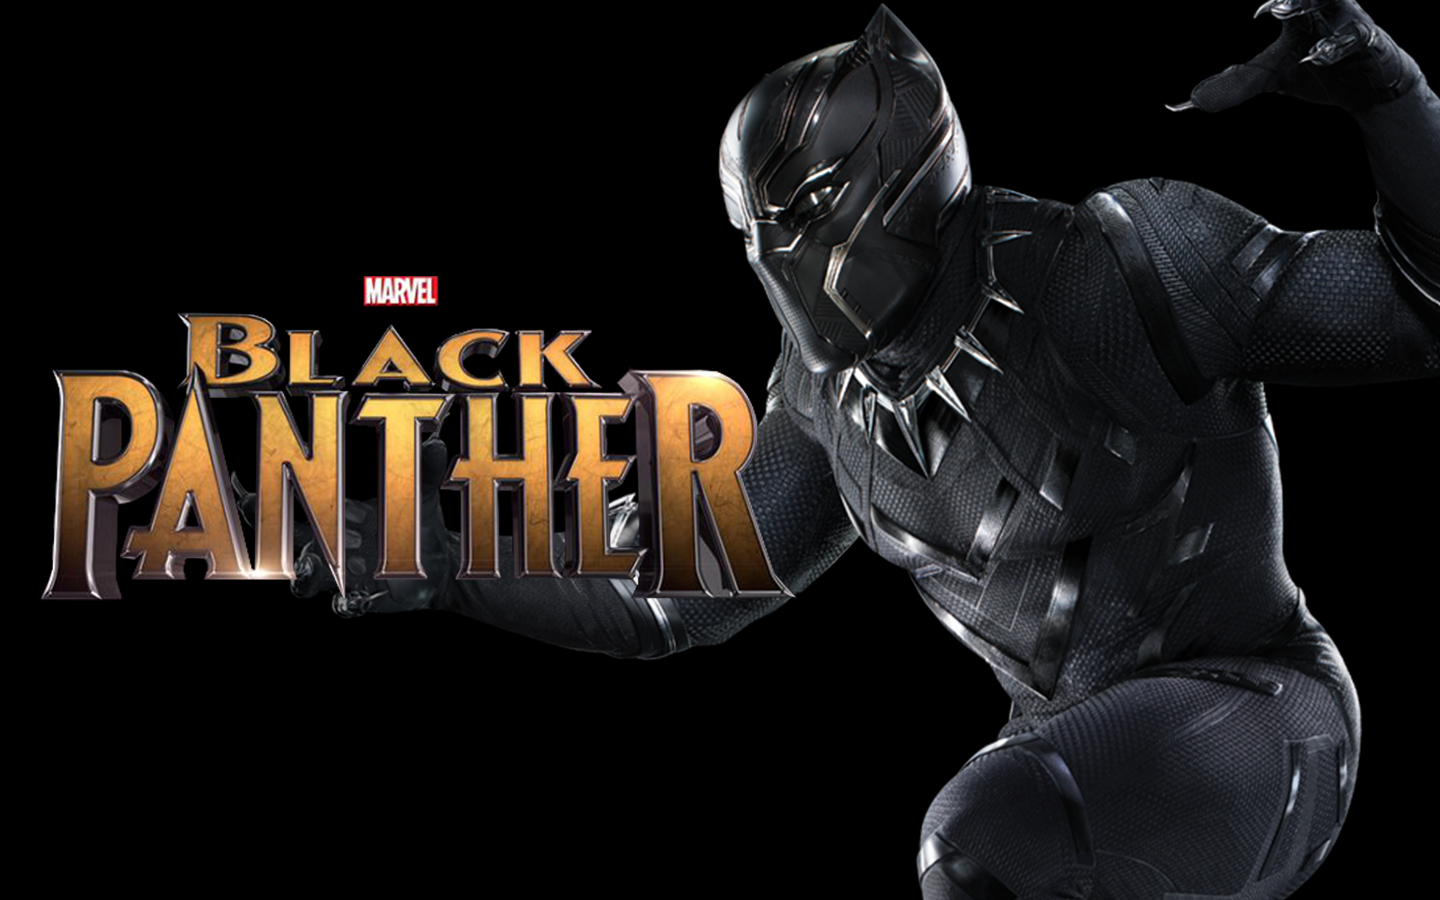 ‘Black Panther’ Reigns Supreme At the Box Office For Third Weekend In A Row; Nears $900 Million Worldwide